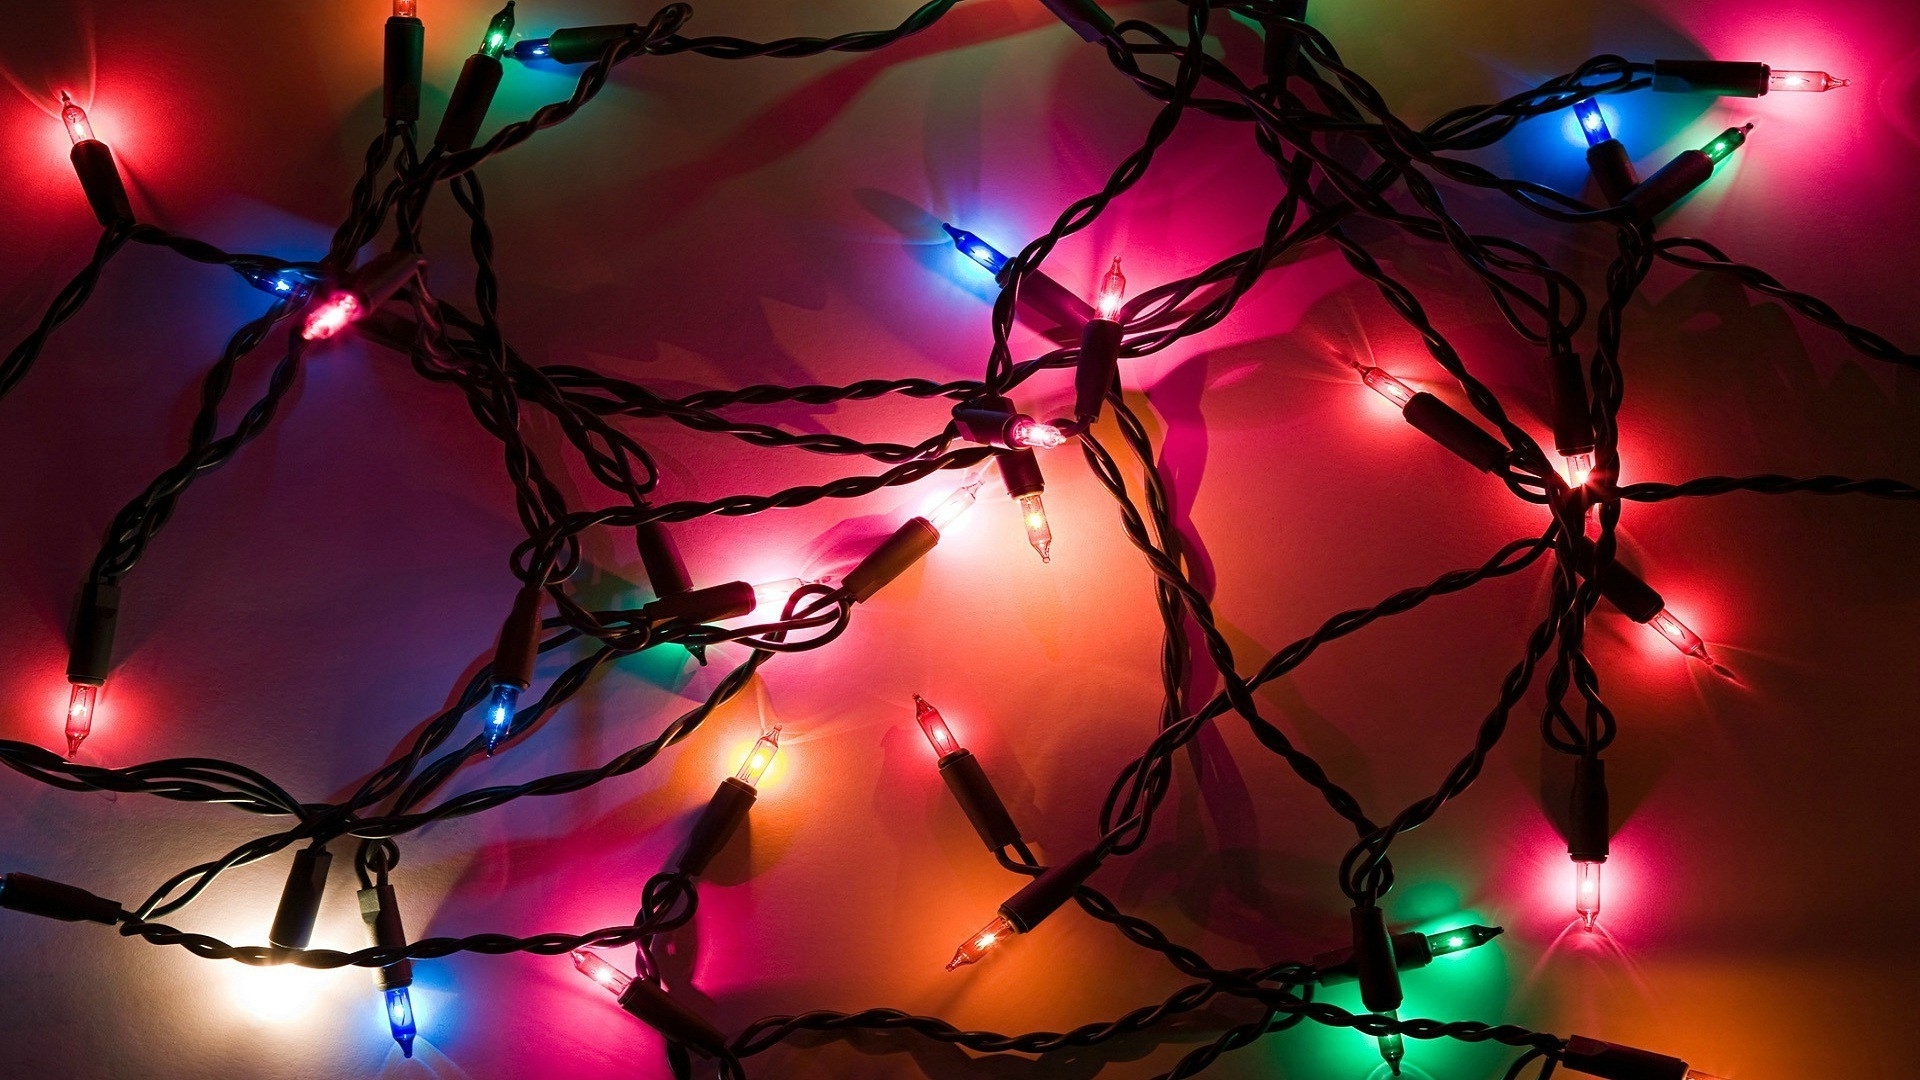 Holiday Lights Wallpaper and HD Background free download on PicGaGa